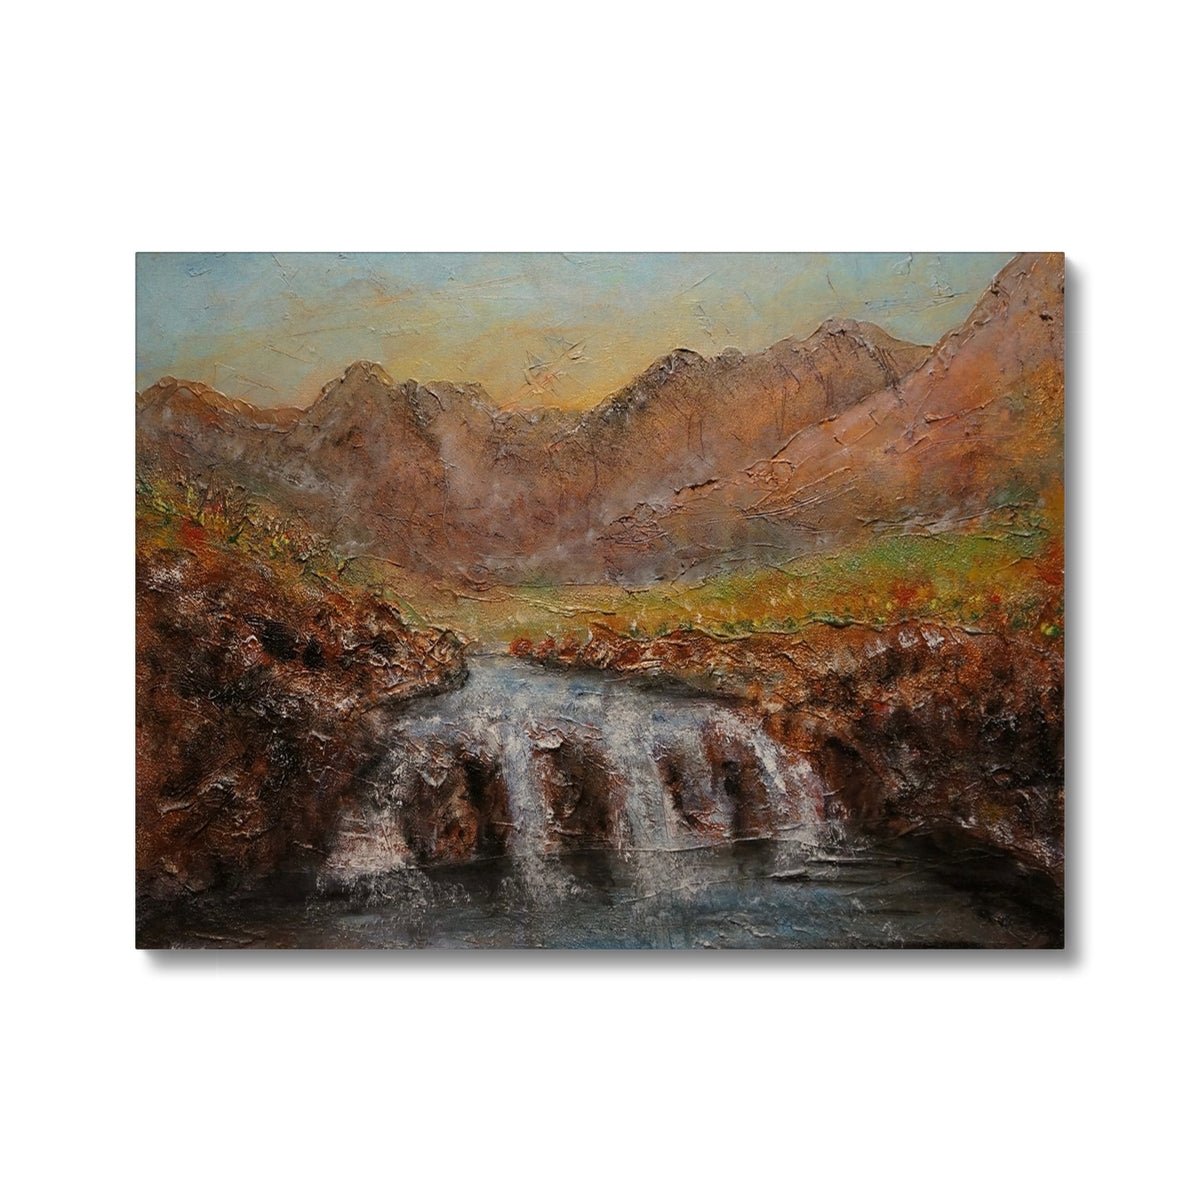 Fairy Pools Dawn Skye Painting | Canvas From Scotland-Contemporary Stretched Canvas Prints-Skye Art Gallery-24"x18"-Paintings, Prints, Homeware, Art Gifts From Scotland By Scottish Artist Kevin Hunter